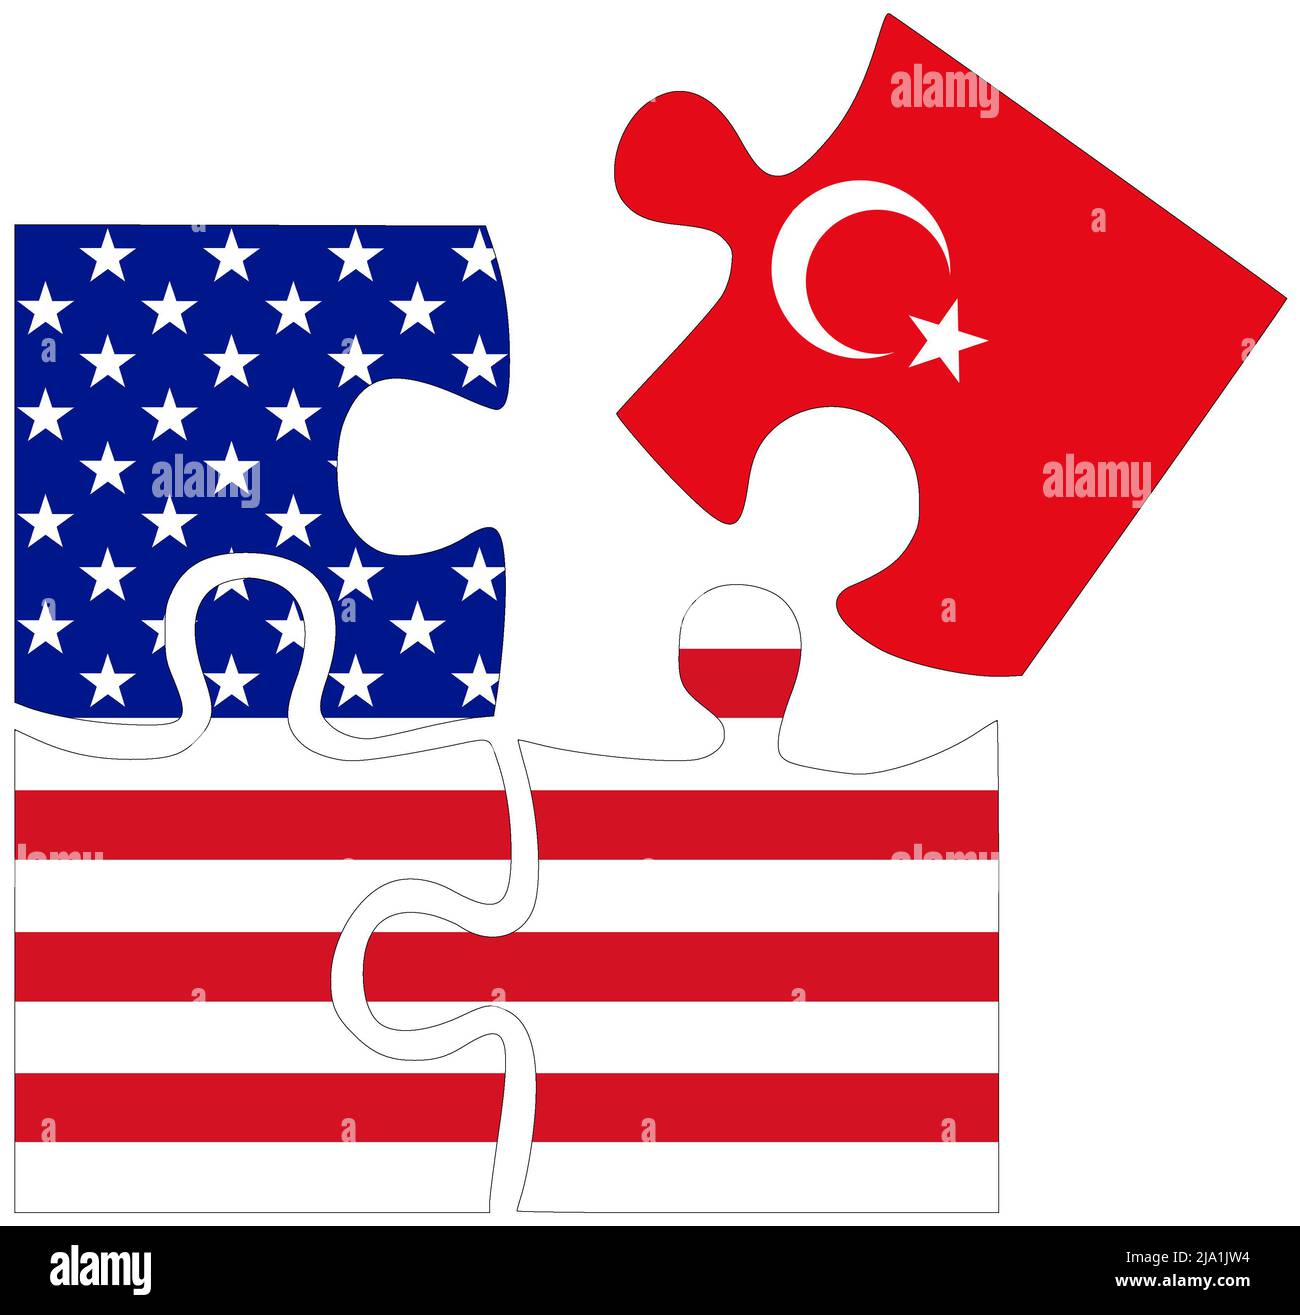 USA - Turkey : puzzle shapes with flags, symbol of agreement or friendship Stock Photo